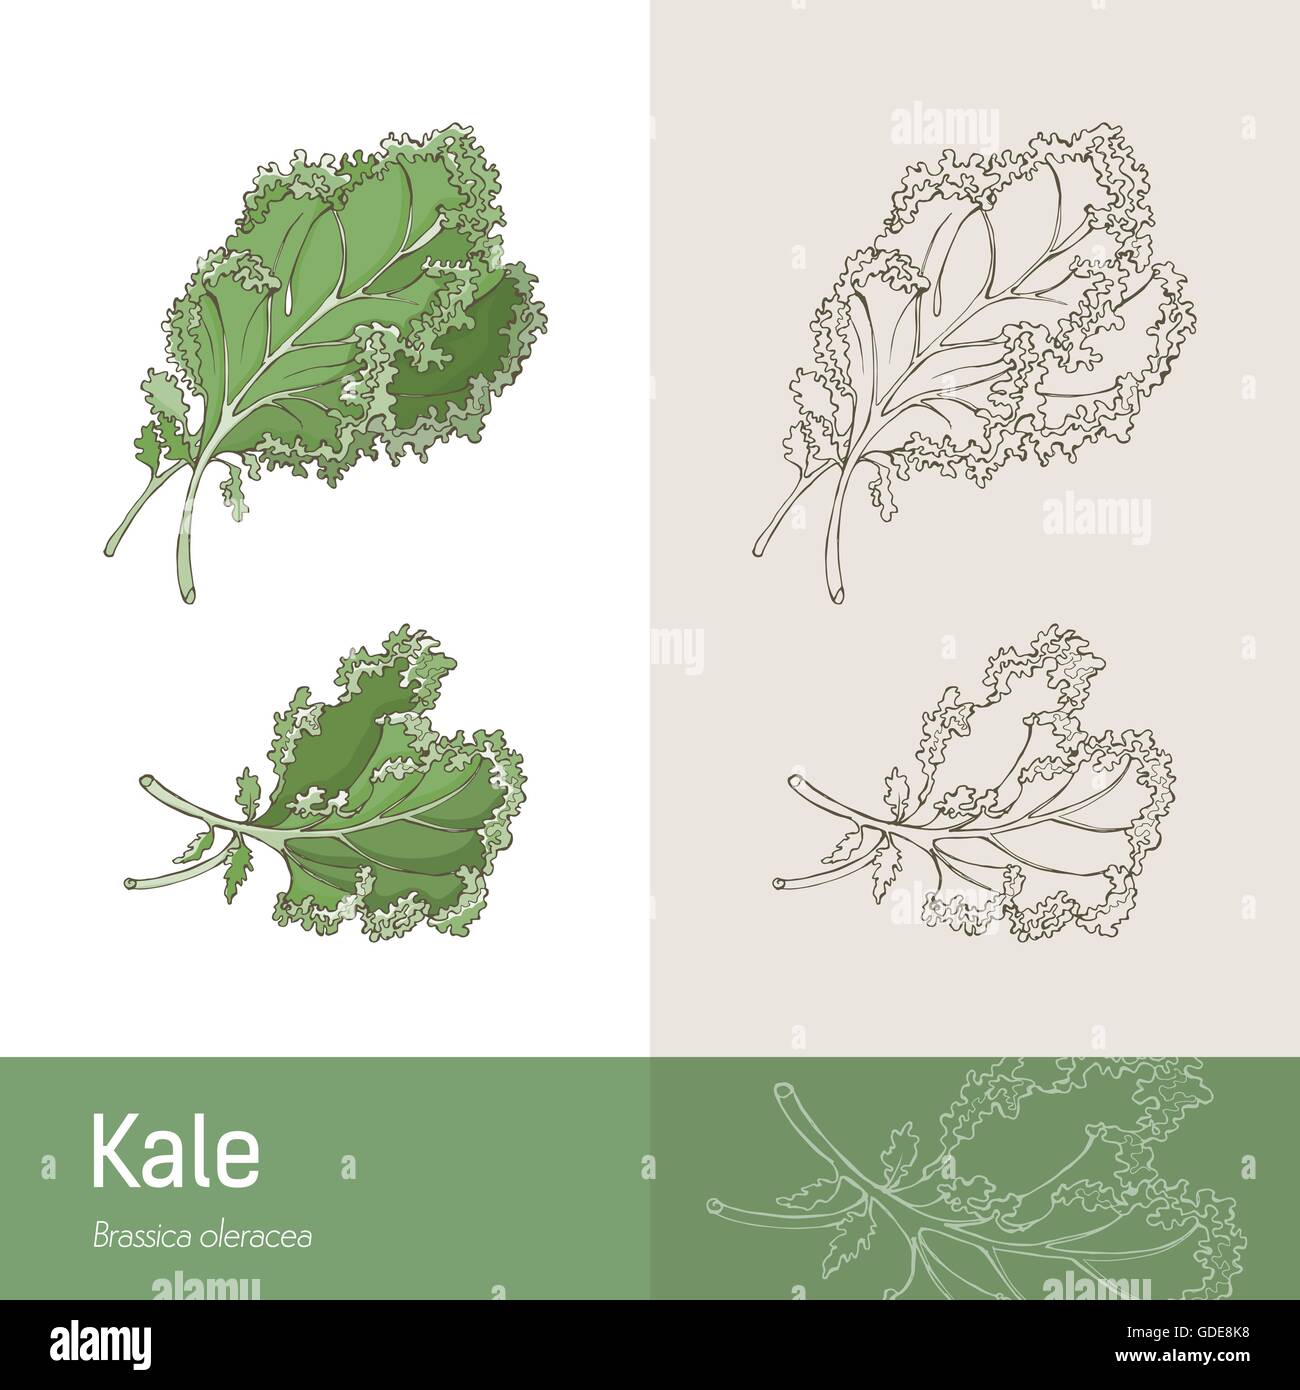 Kale cabbage botanical hand drawing, healthy eating concept Stock Vector